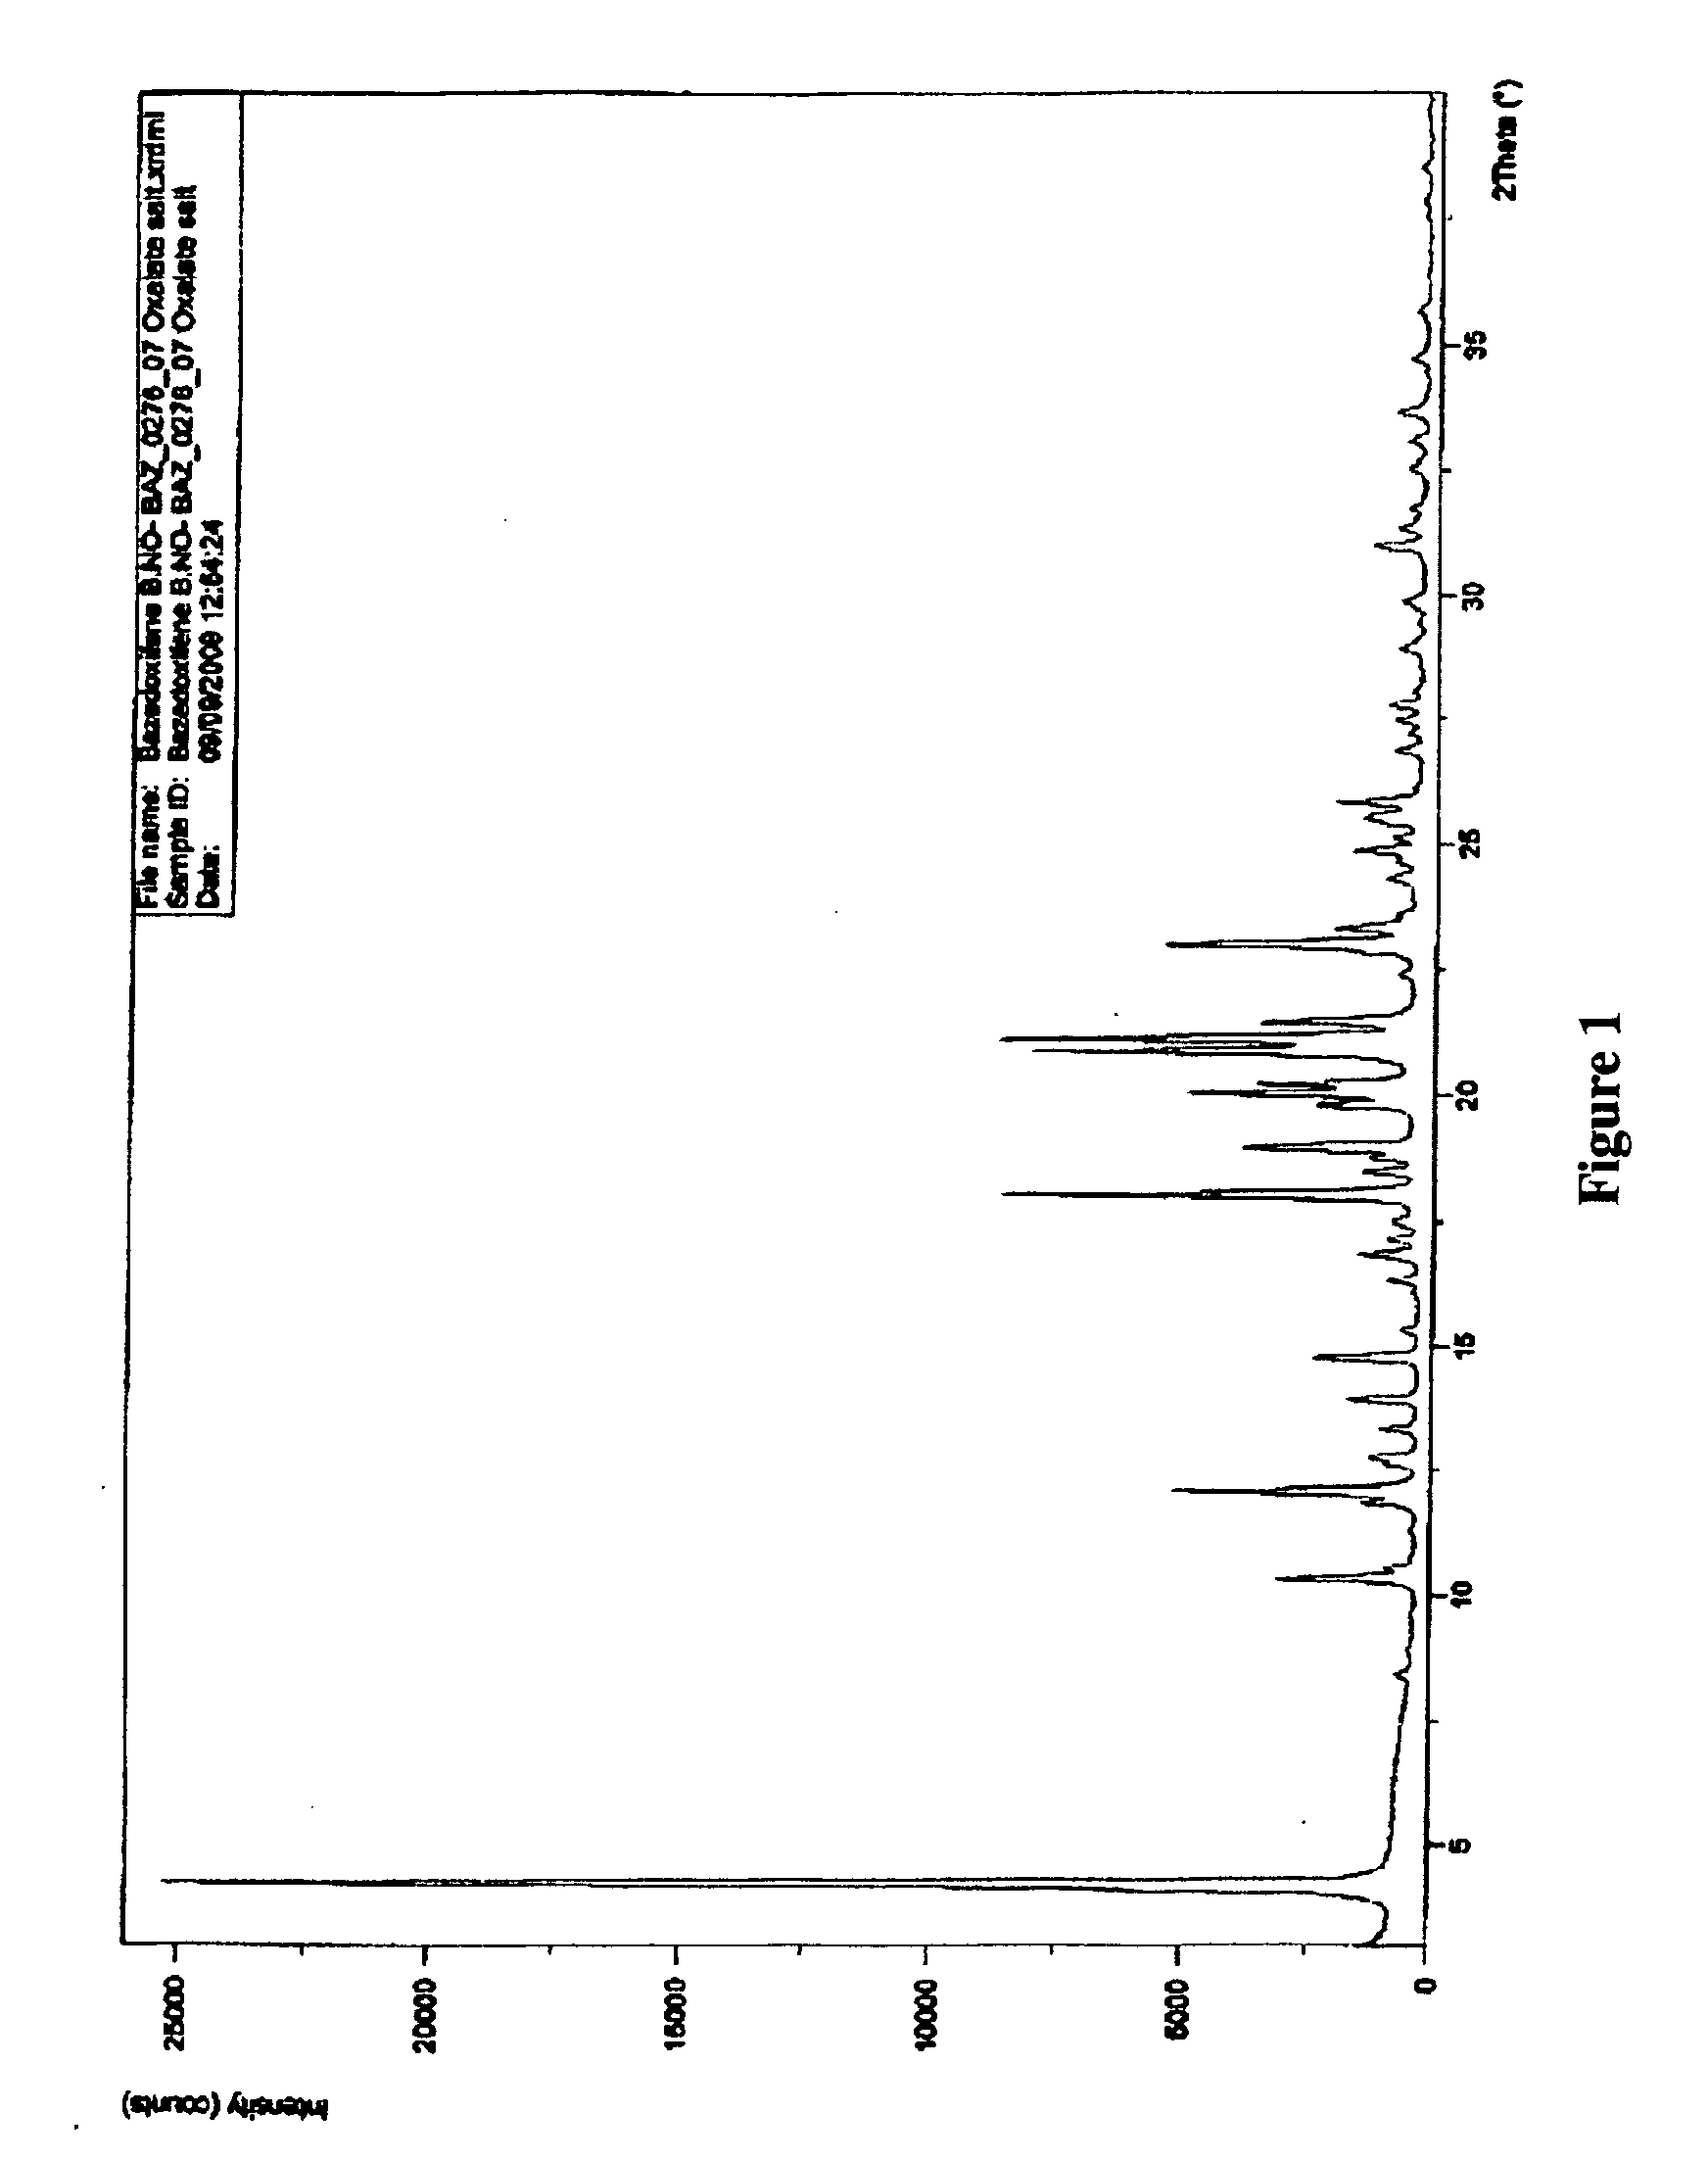 Processes for the synthesis of bazedoxifene acetate and intermediates thereof